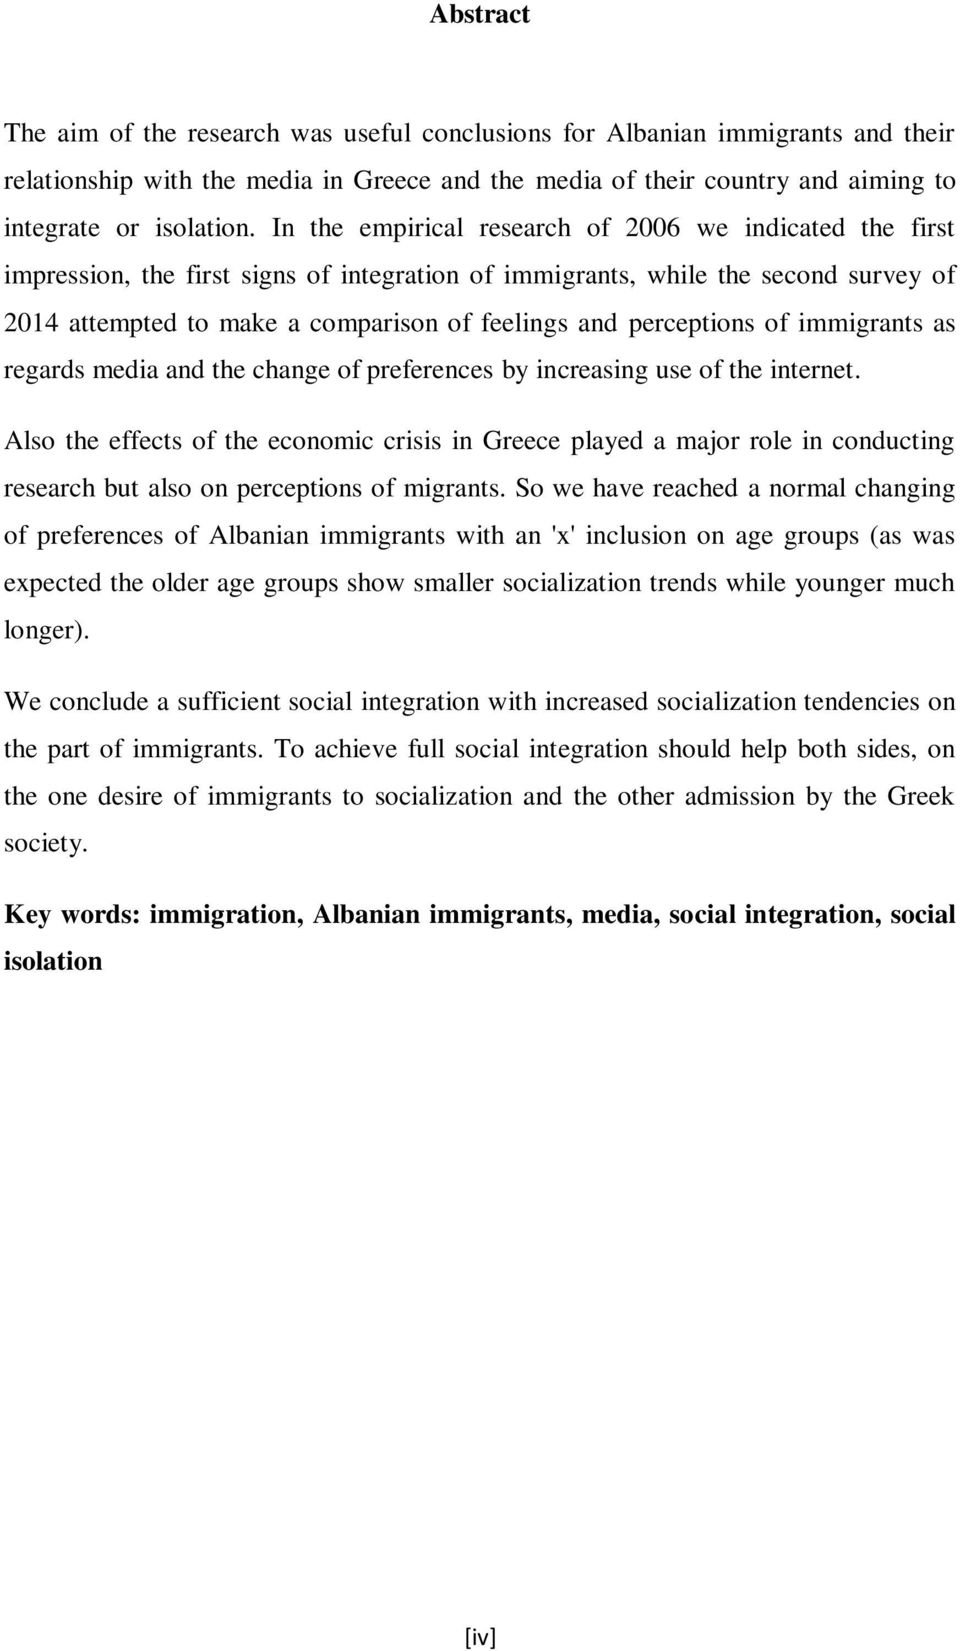 perceptions of immigrants as regards media and the change of preferences by increasing use of the internet.